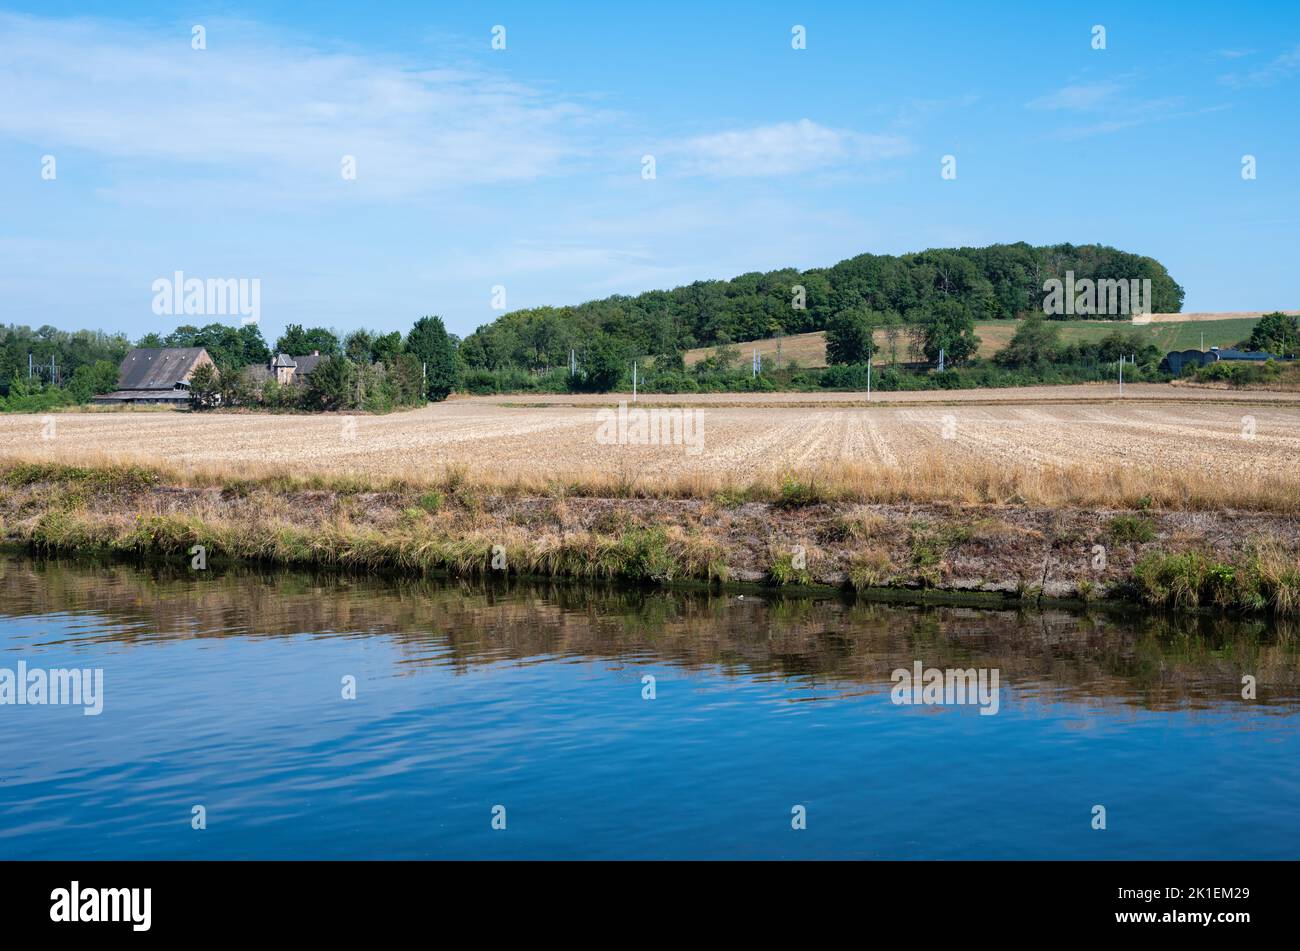 View over the River Sambre, agriculture fields and farmhouses, Floreffe, Belgium Stock Photo